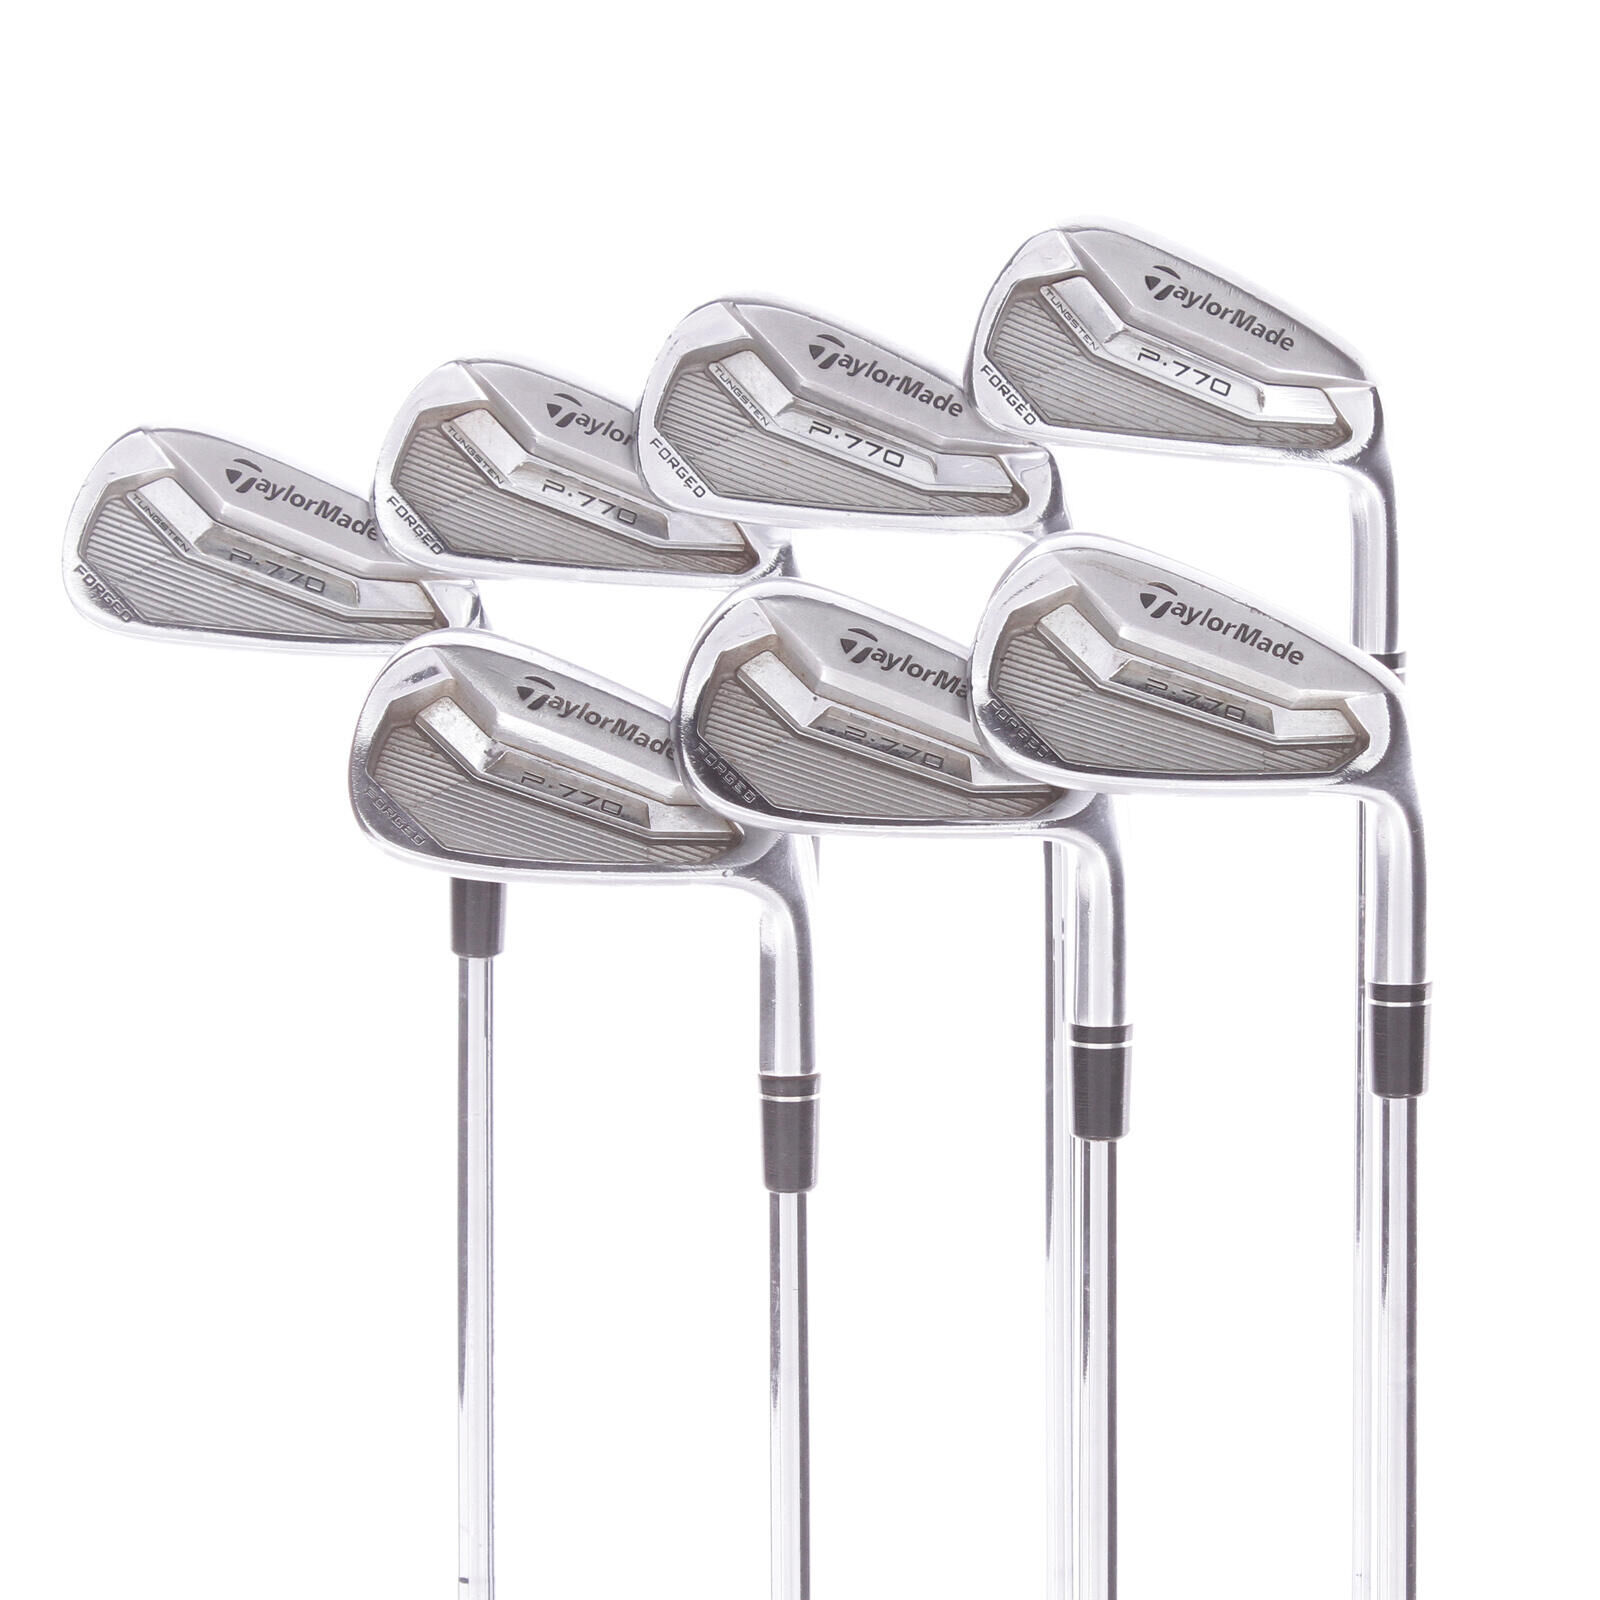 TAYLORMADE USED - Iron Set 4-PW TaylorMade P770 2017 Steel Shaft Right Handed - GRADE C